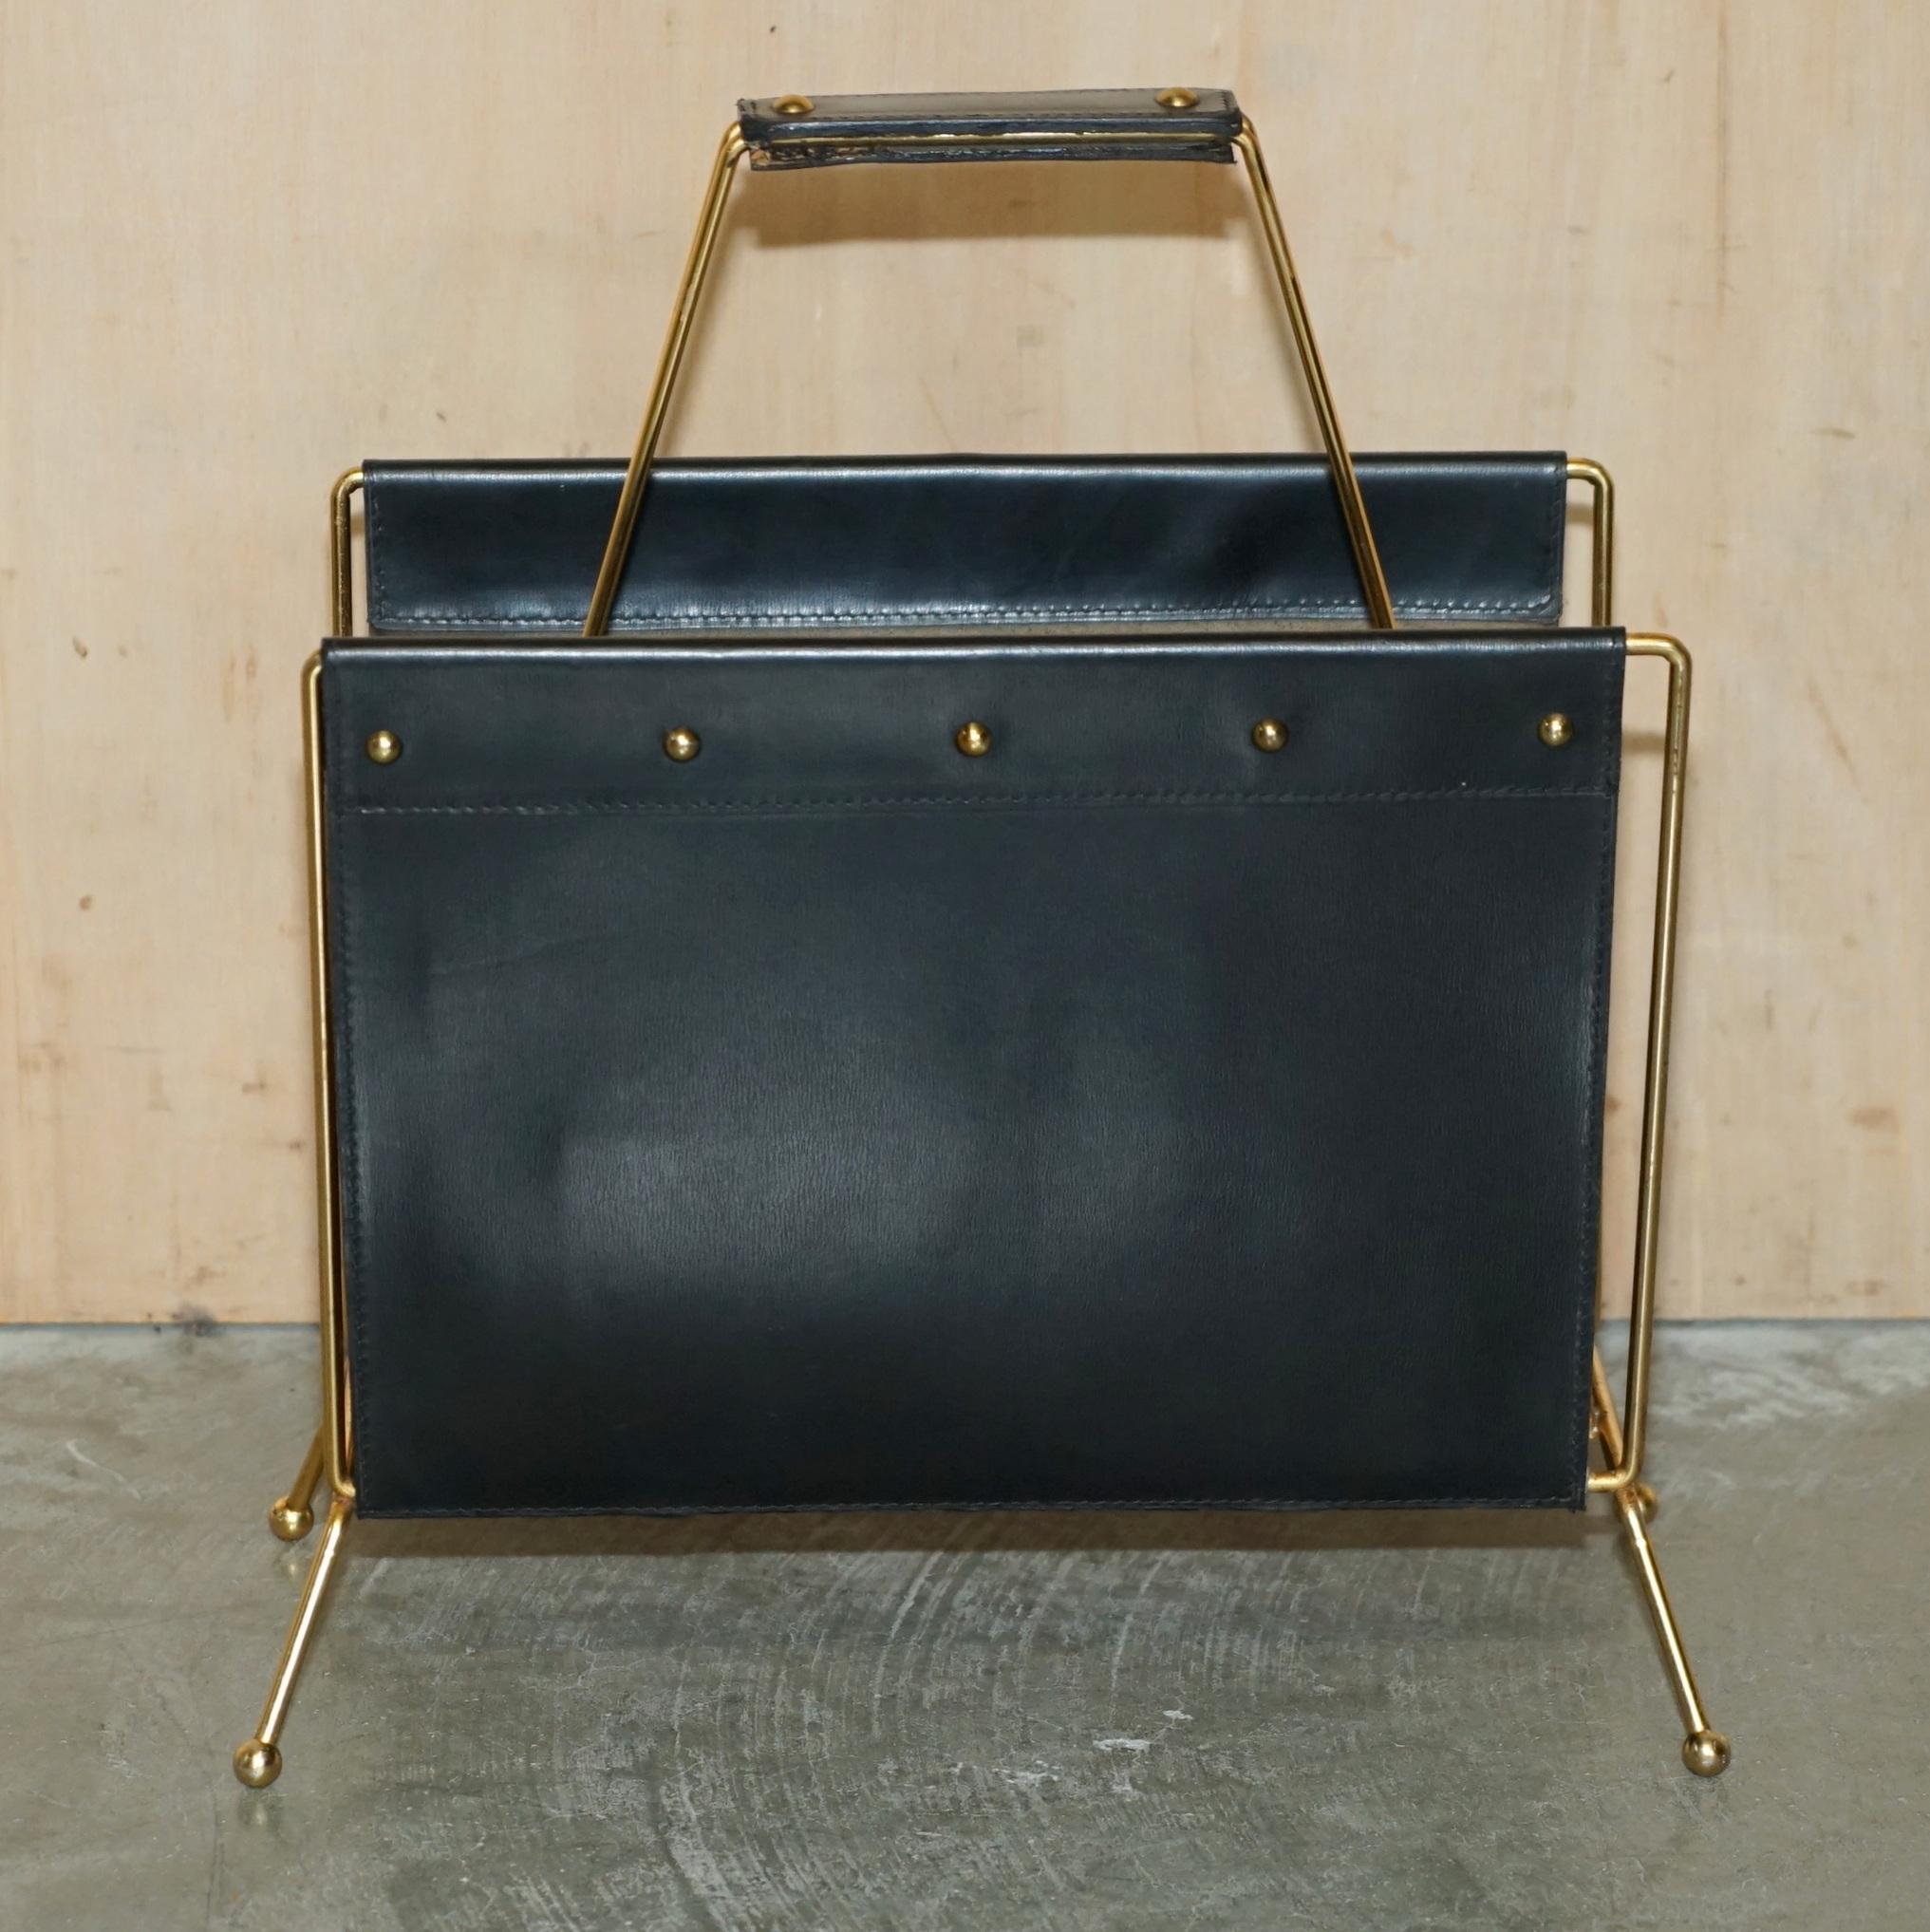 Royal House Antiques

Royal House Antiques is delighted to offer for sale this absolutely exquisite super collectable Jacques Adnet Black Leather and Gold Gilt Brass magazine / newspaper rack 

Please note the delivery fee listed is just a guide, it